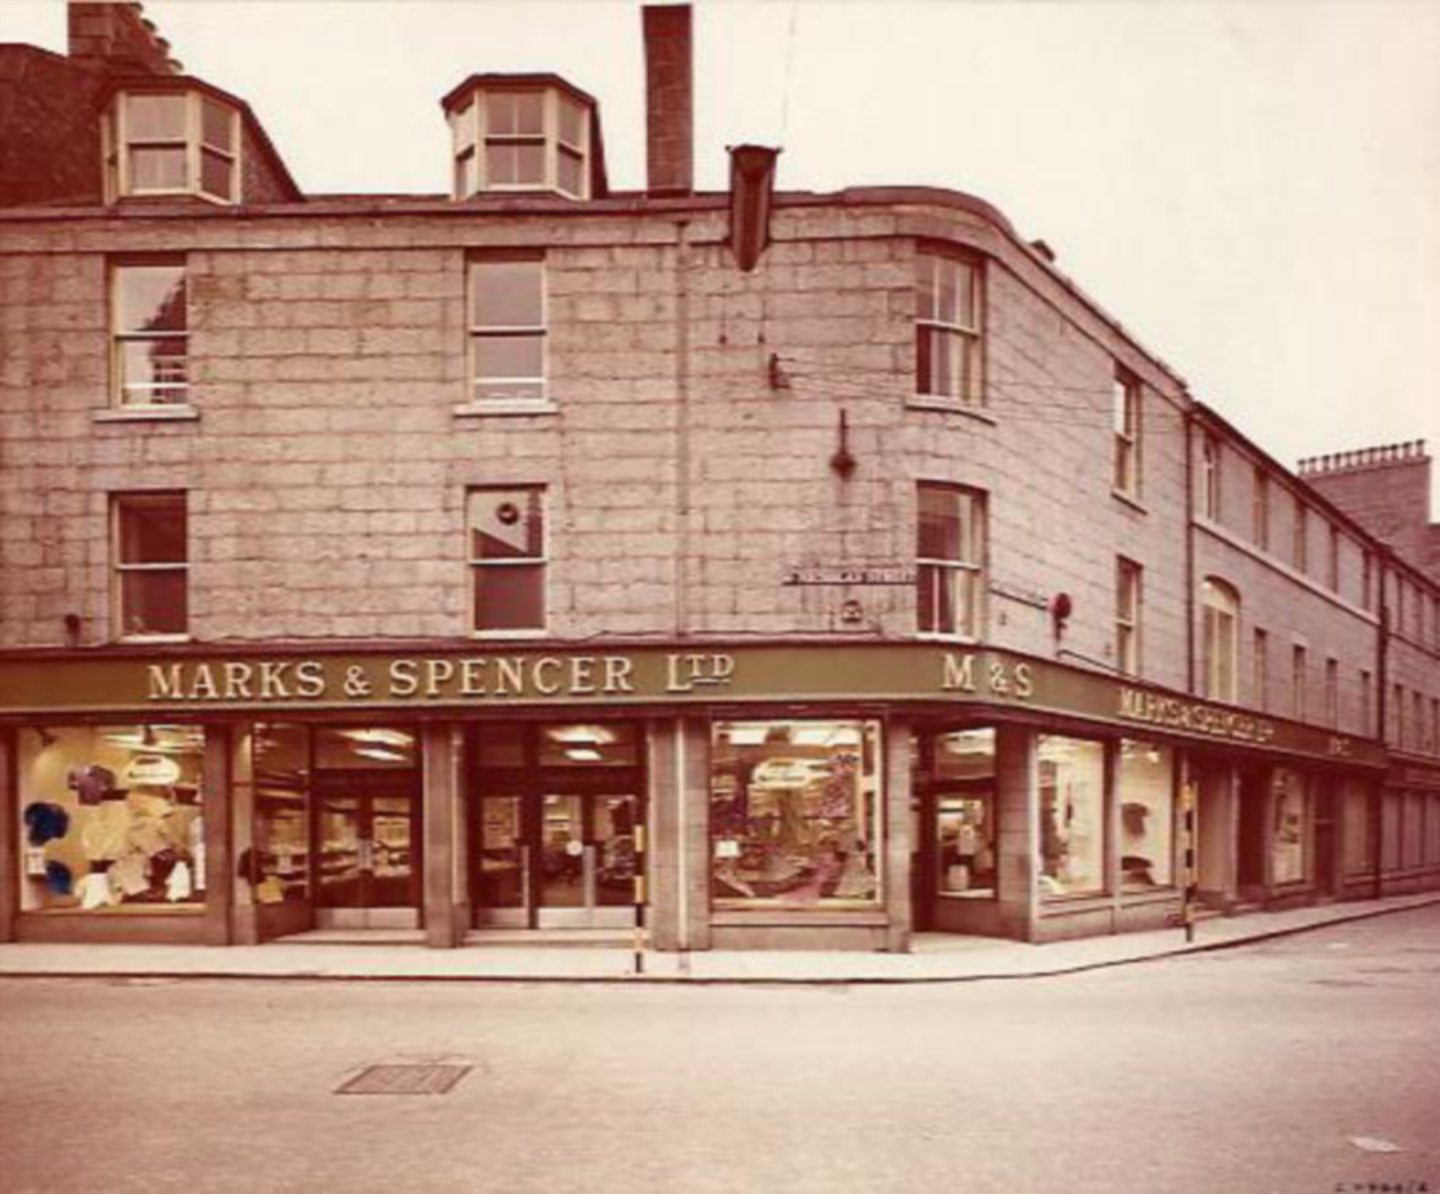 Marks & Spencer, Aberdeen, as it looked in the 1950s